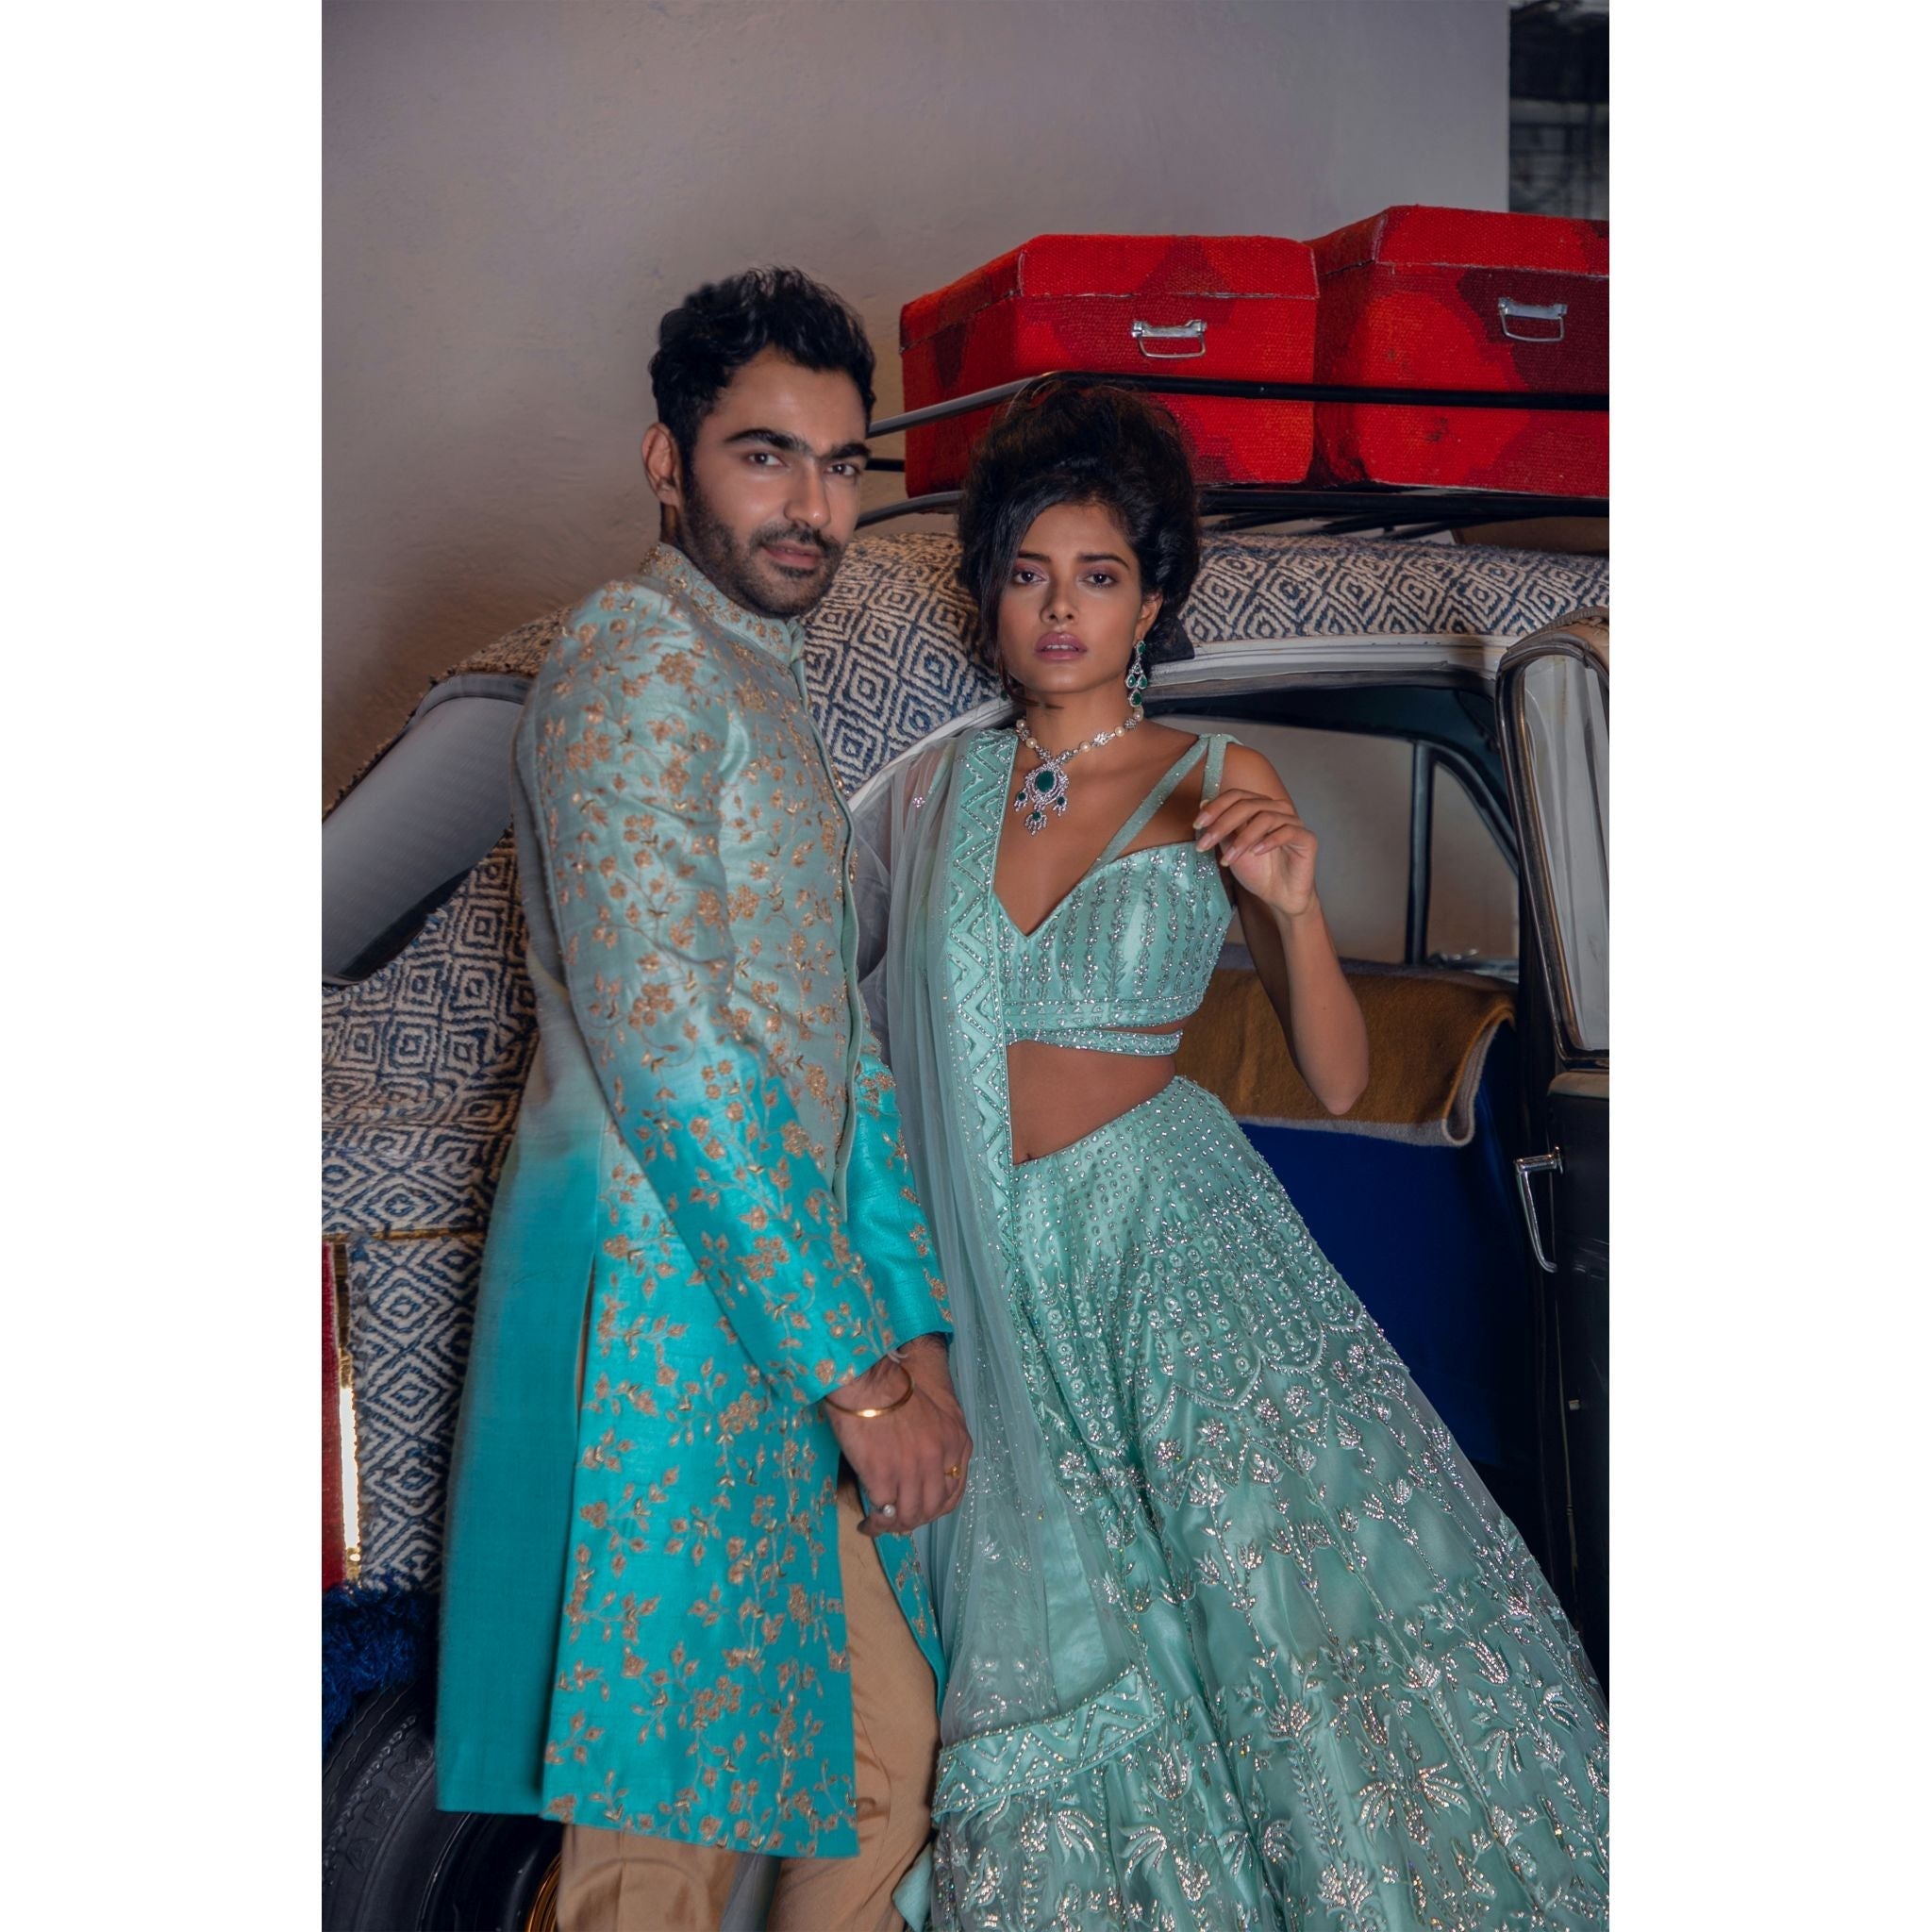 Sea Green - Turquoise Ombre Sherwani - Indian Designer Bridal Wedding Outfit